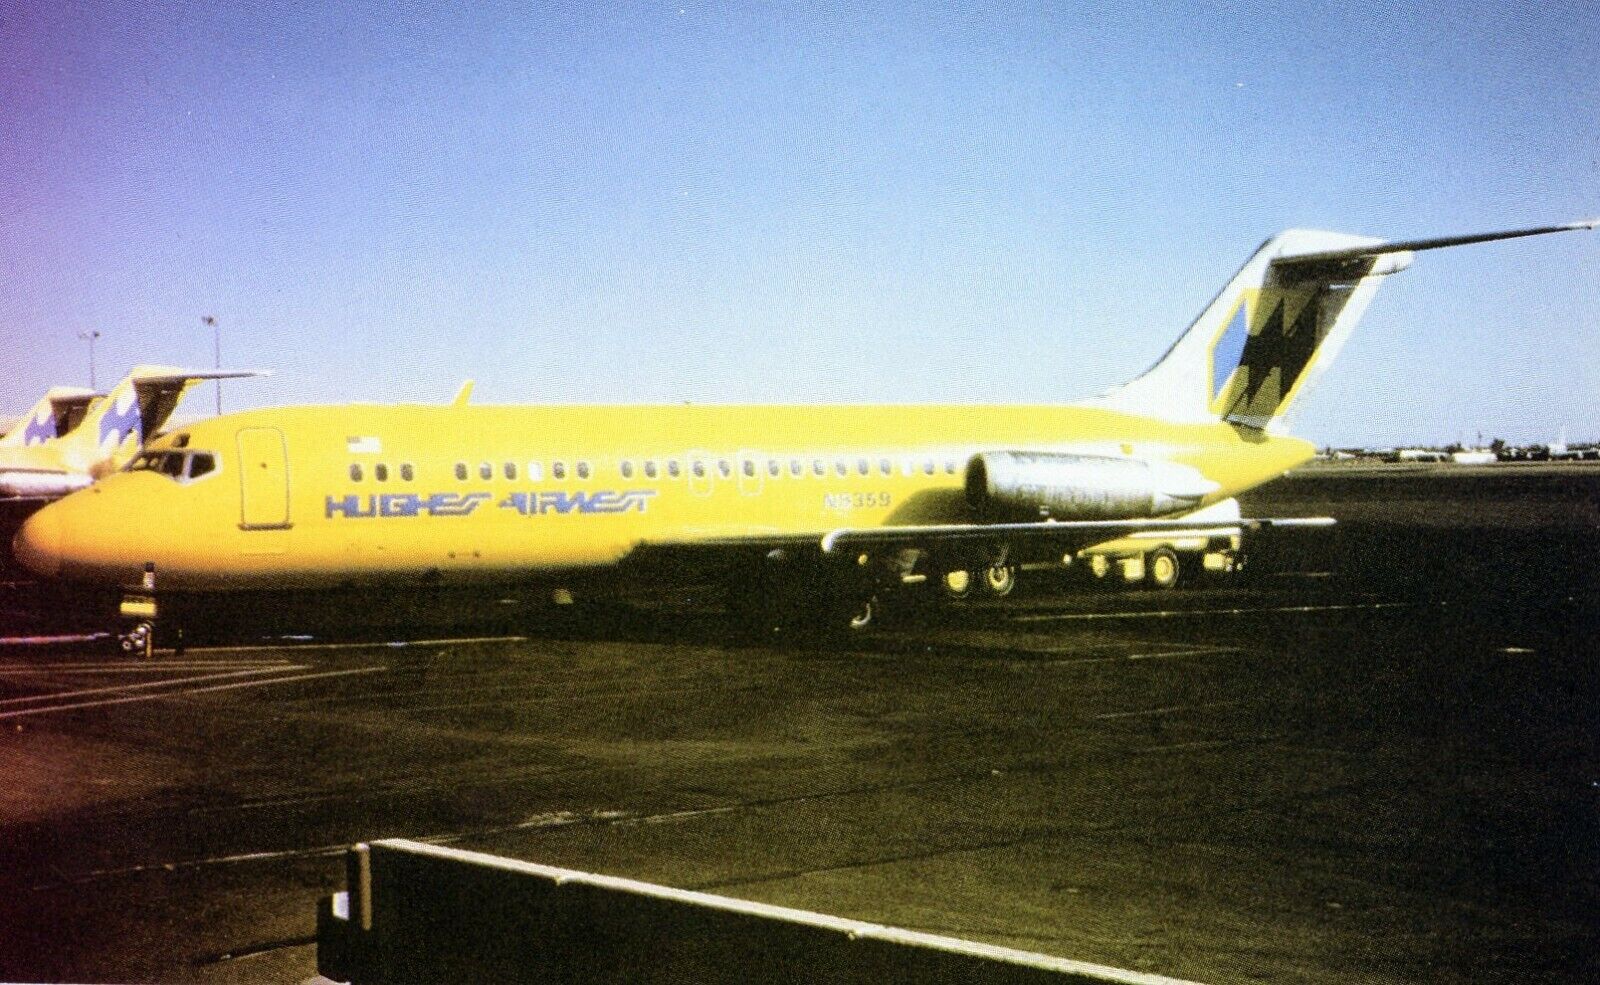 HUGHES AIRWEST  AIRLINES  DC-9-30  AIRPORT / AIRPLANE / AIRCRAFT 428 / DELTA